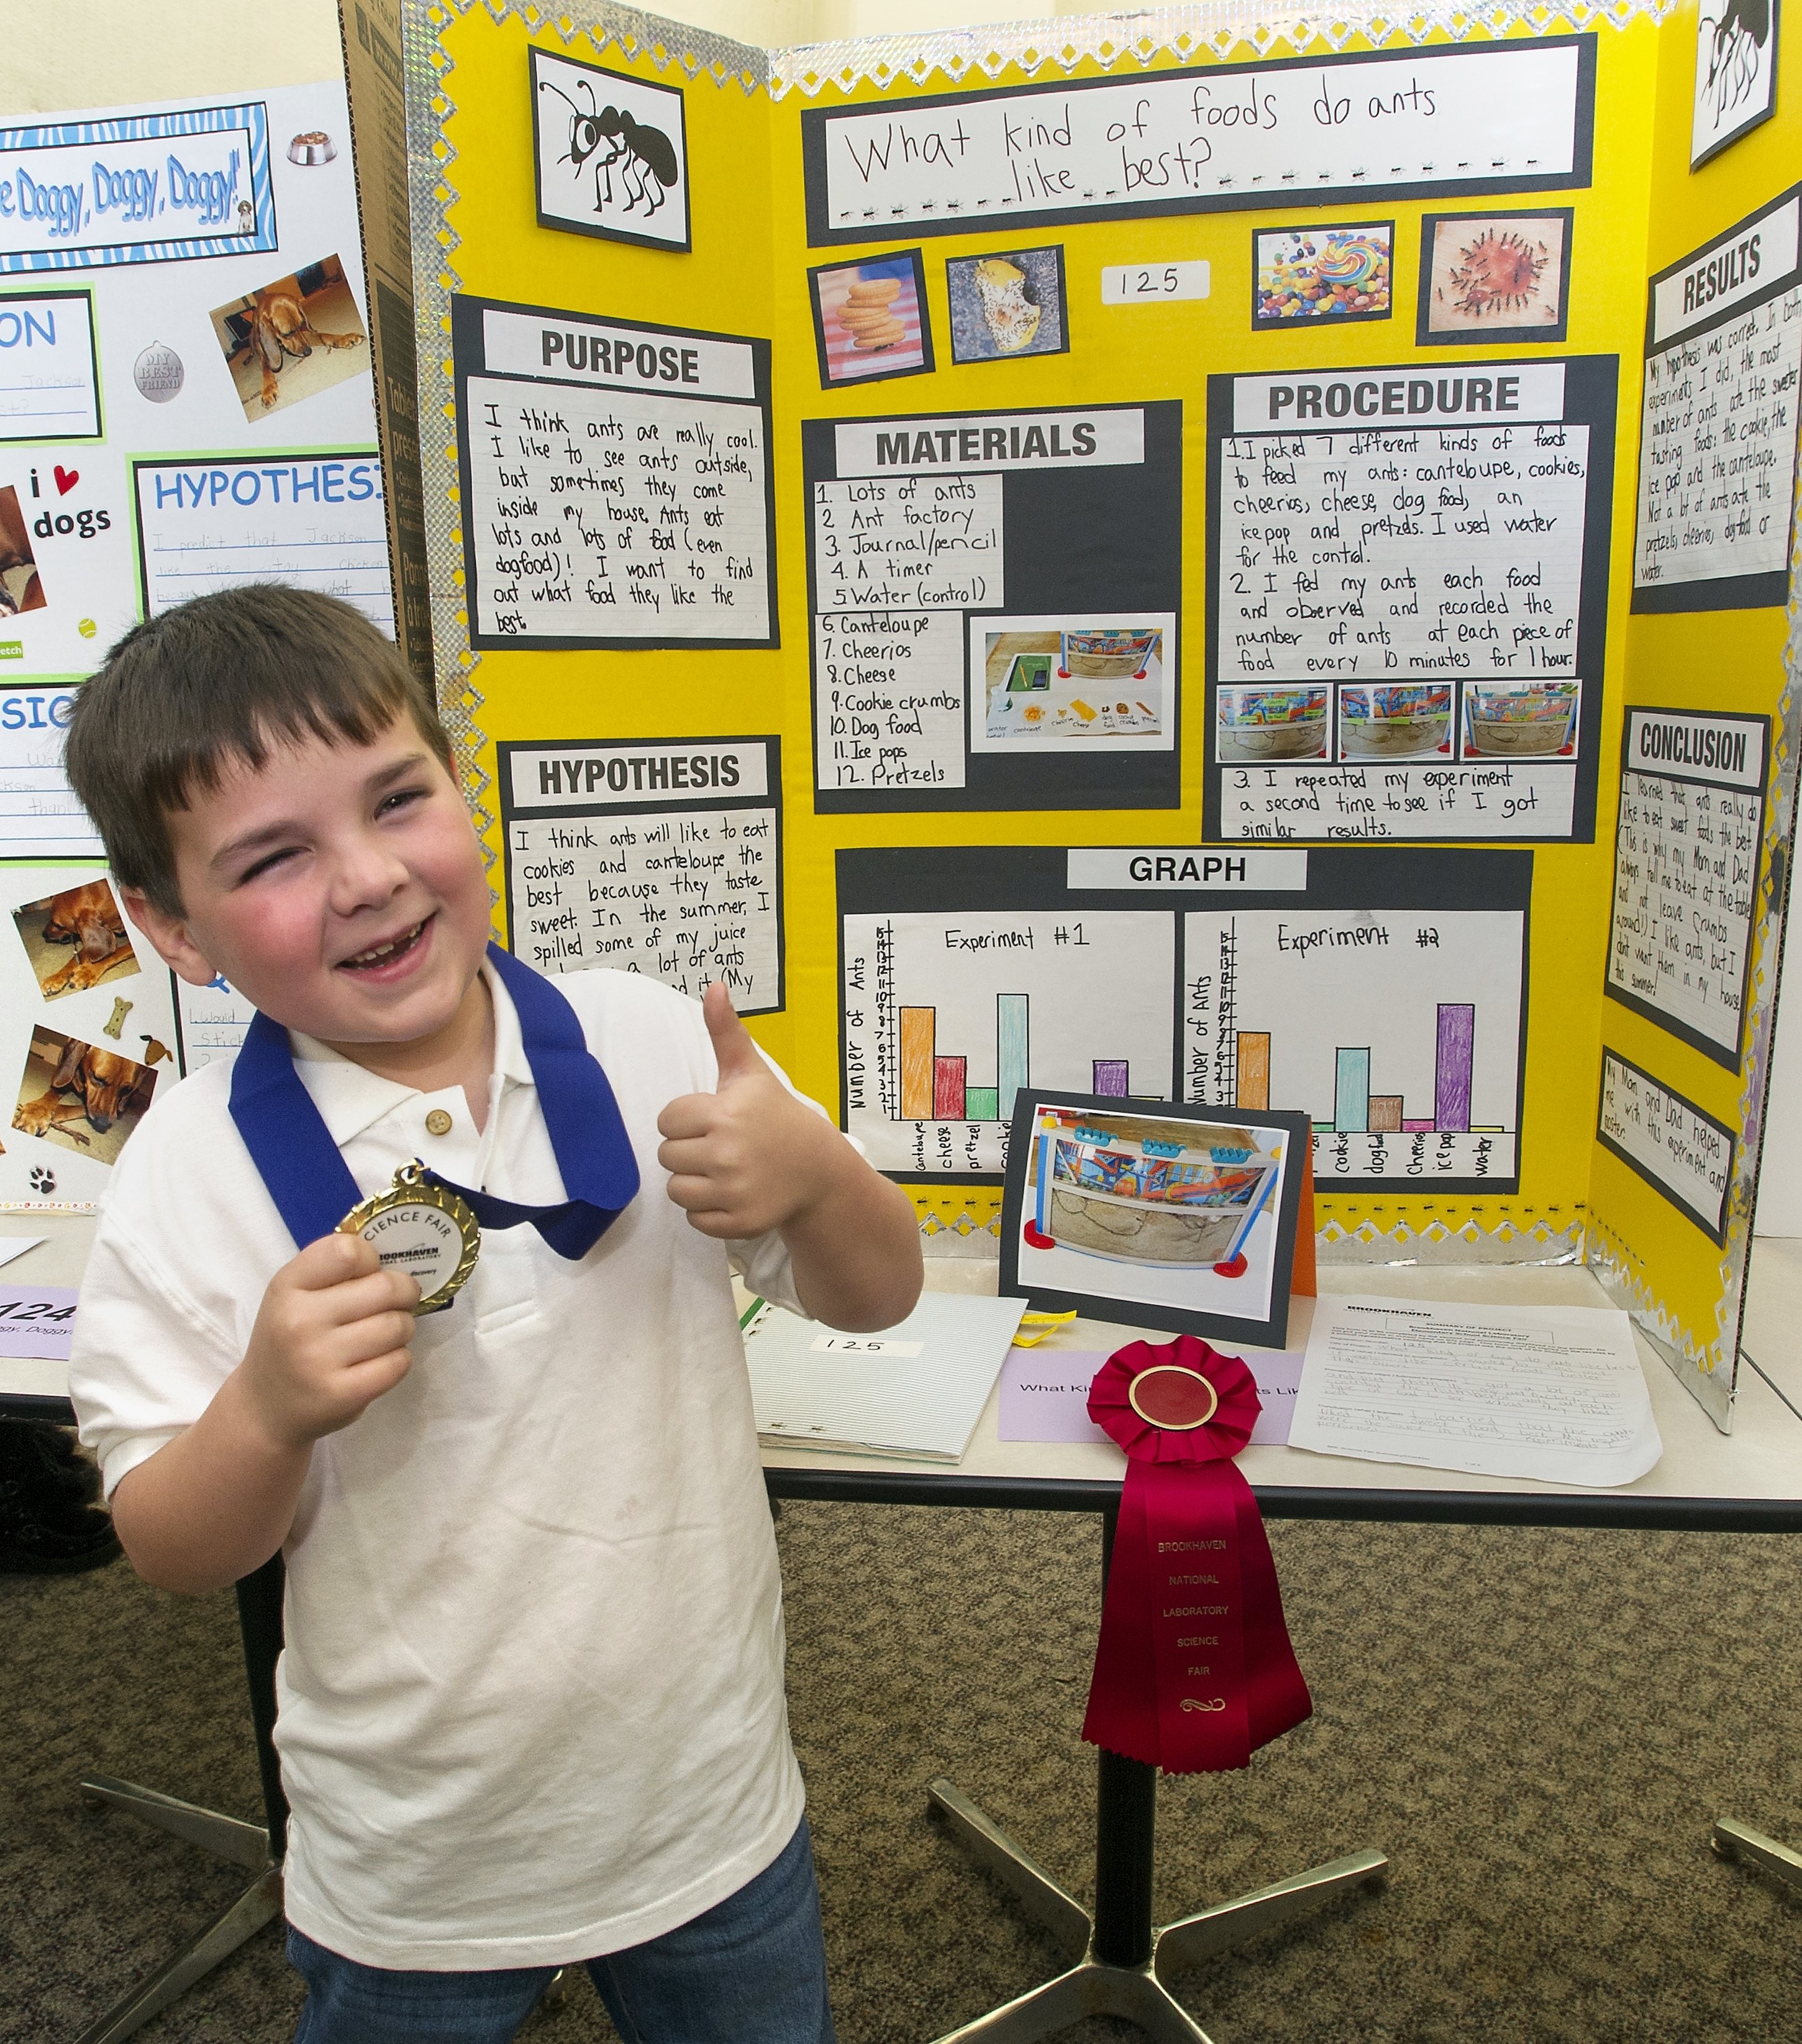 Albums 98+ Images pictures of science fair projects Completed